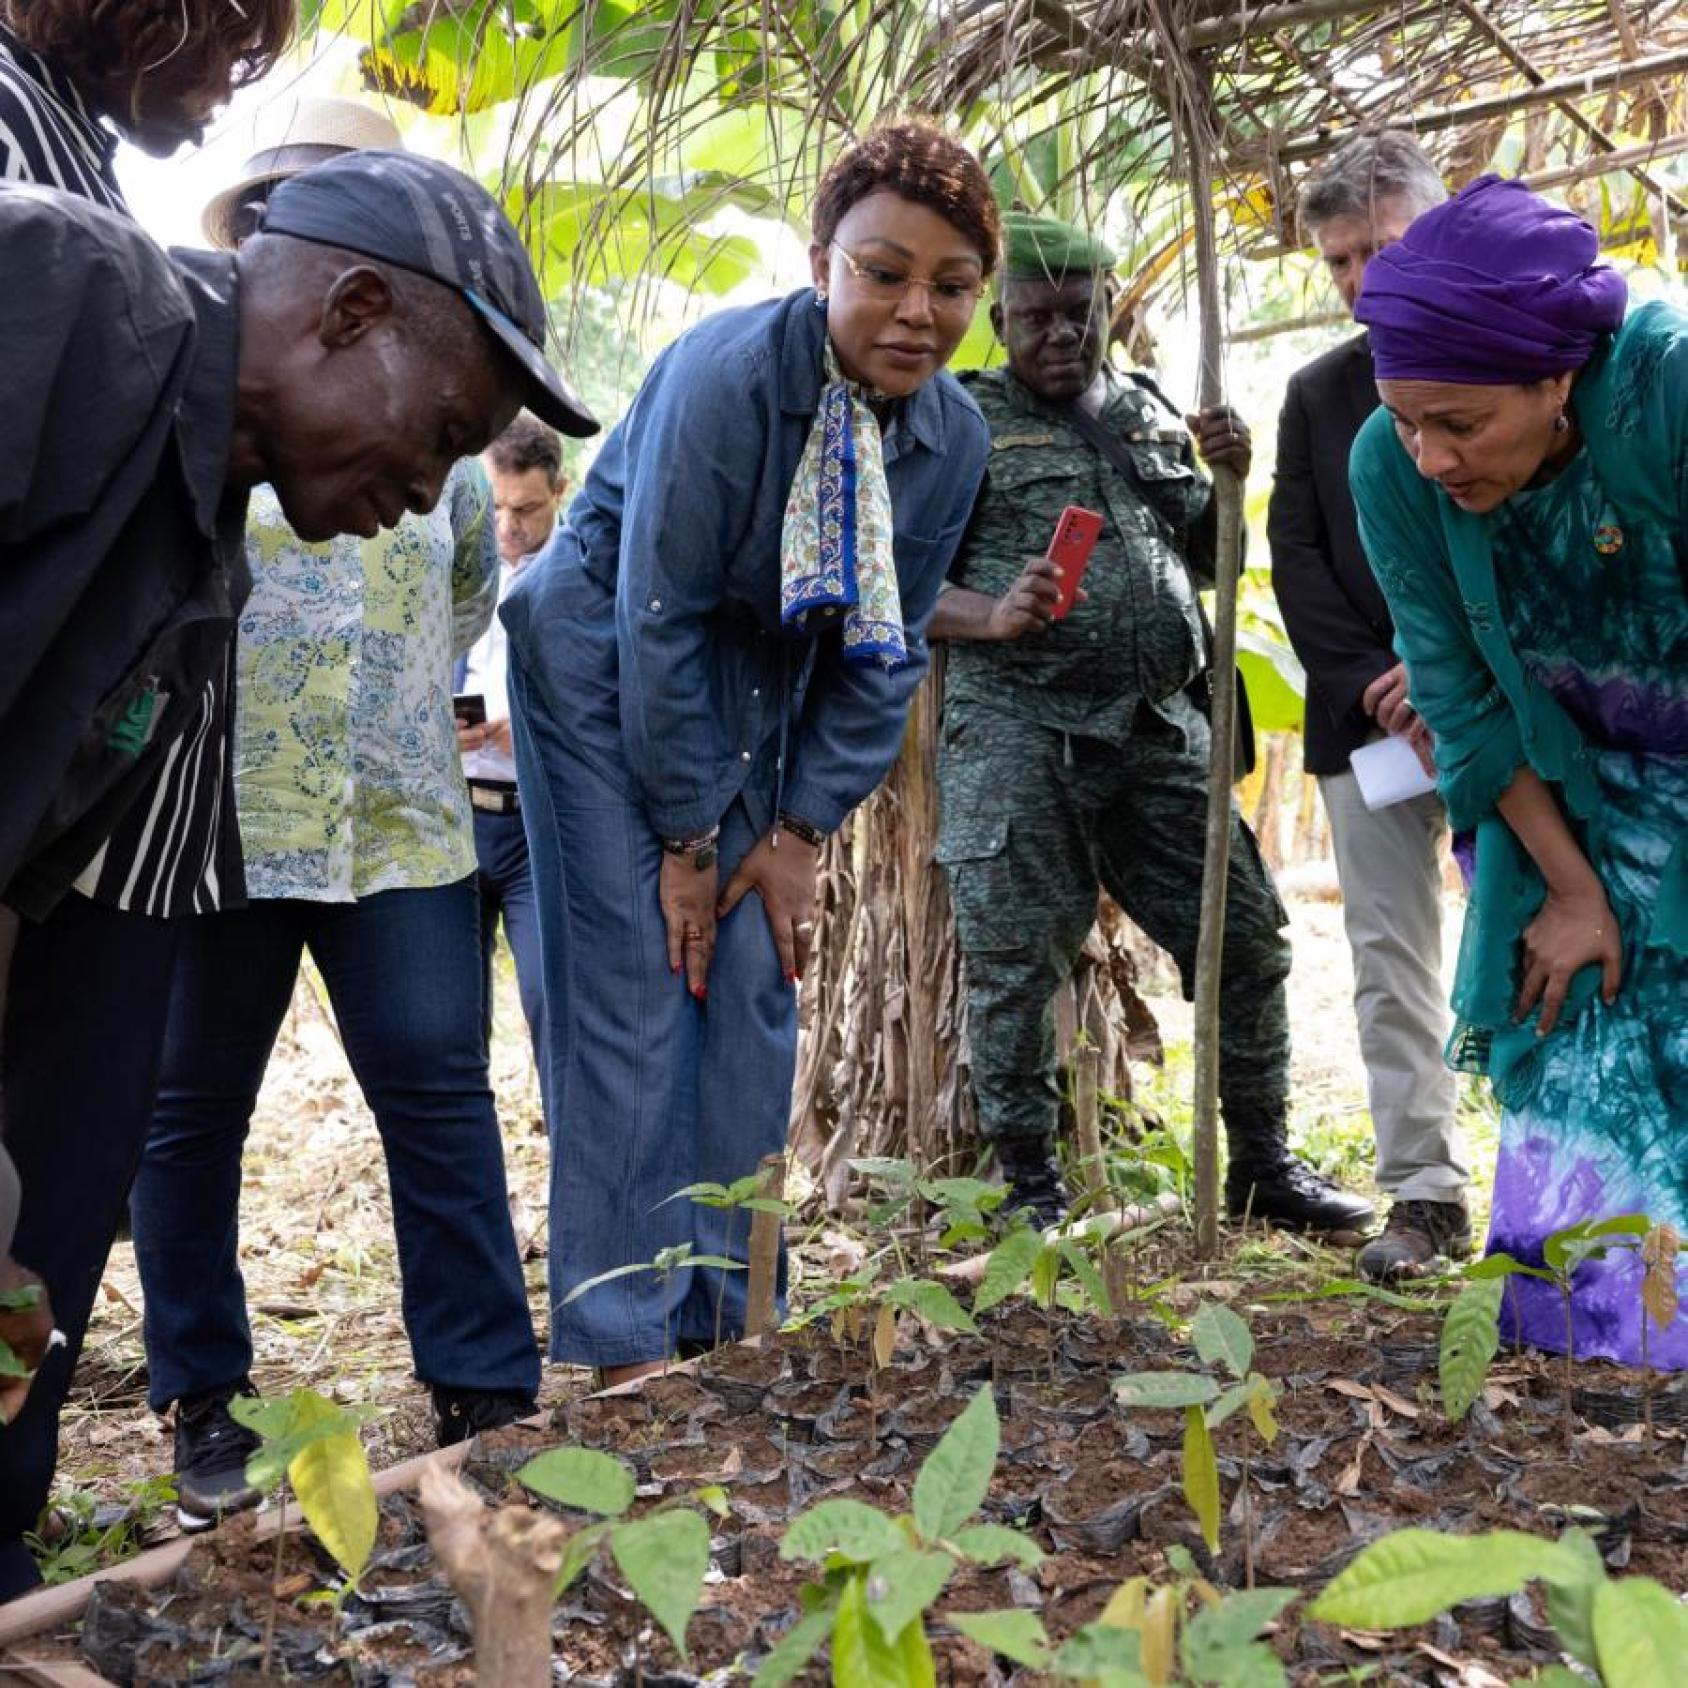 The regeneration of plantations through agroforestry is critical for achieving a sustainable cocoa production in Côte d'Ivoire, according to the UN Deputy Secretary-General.